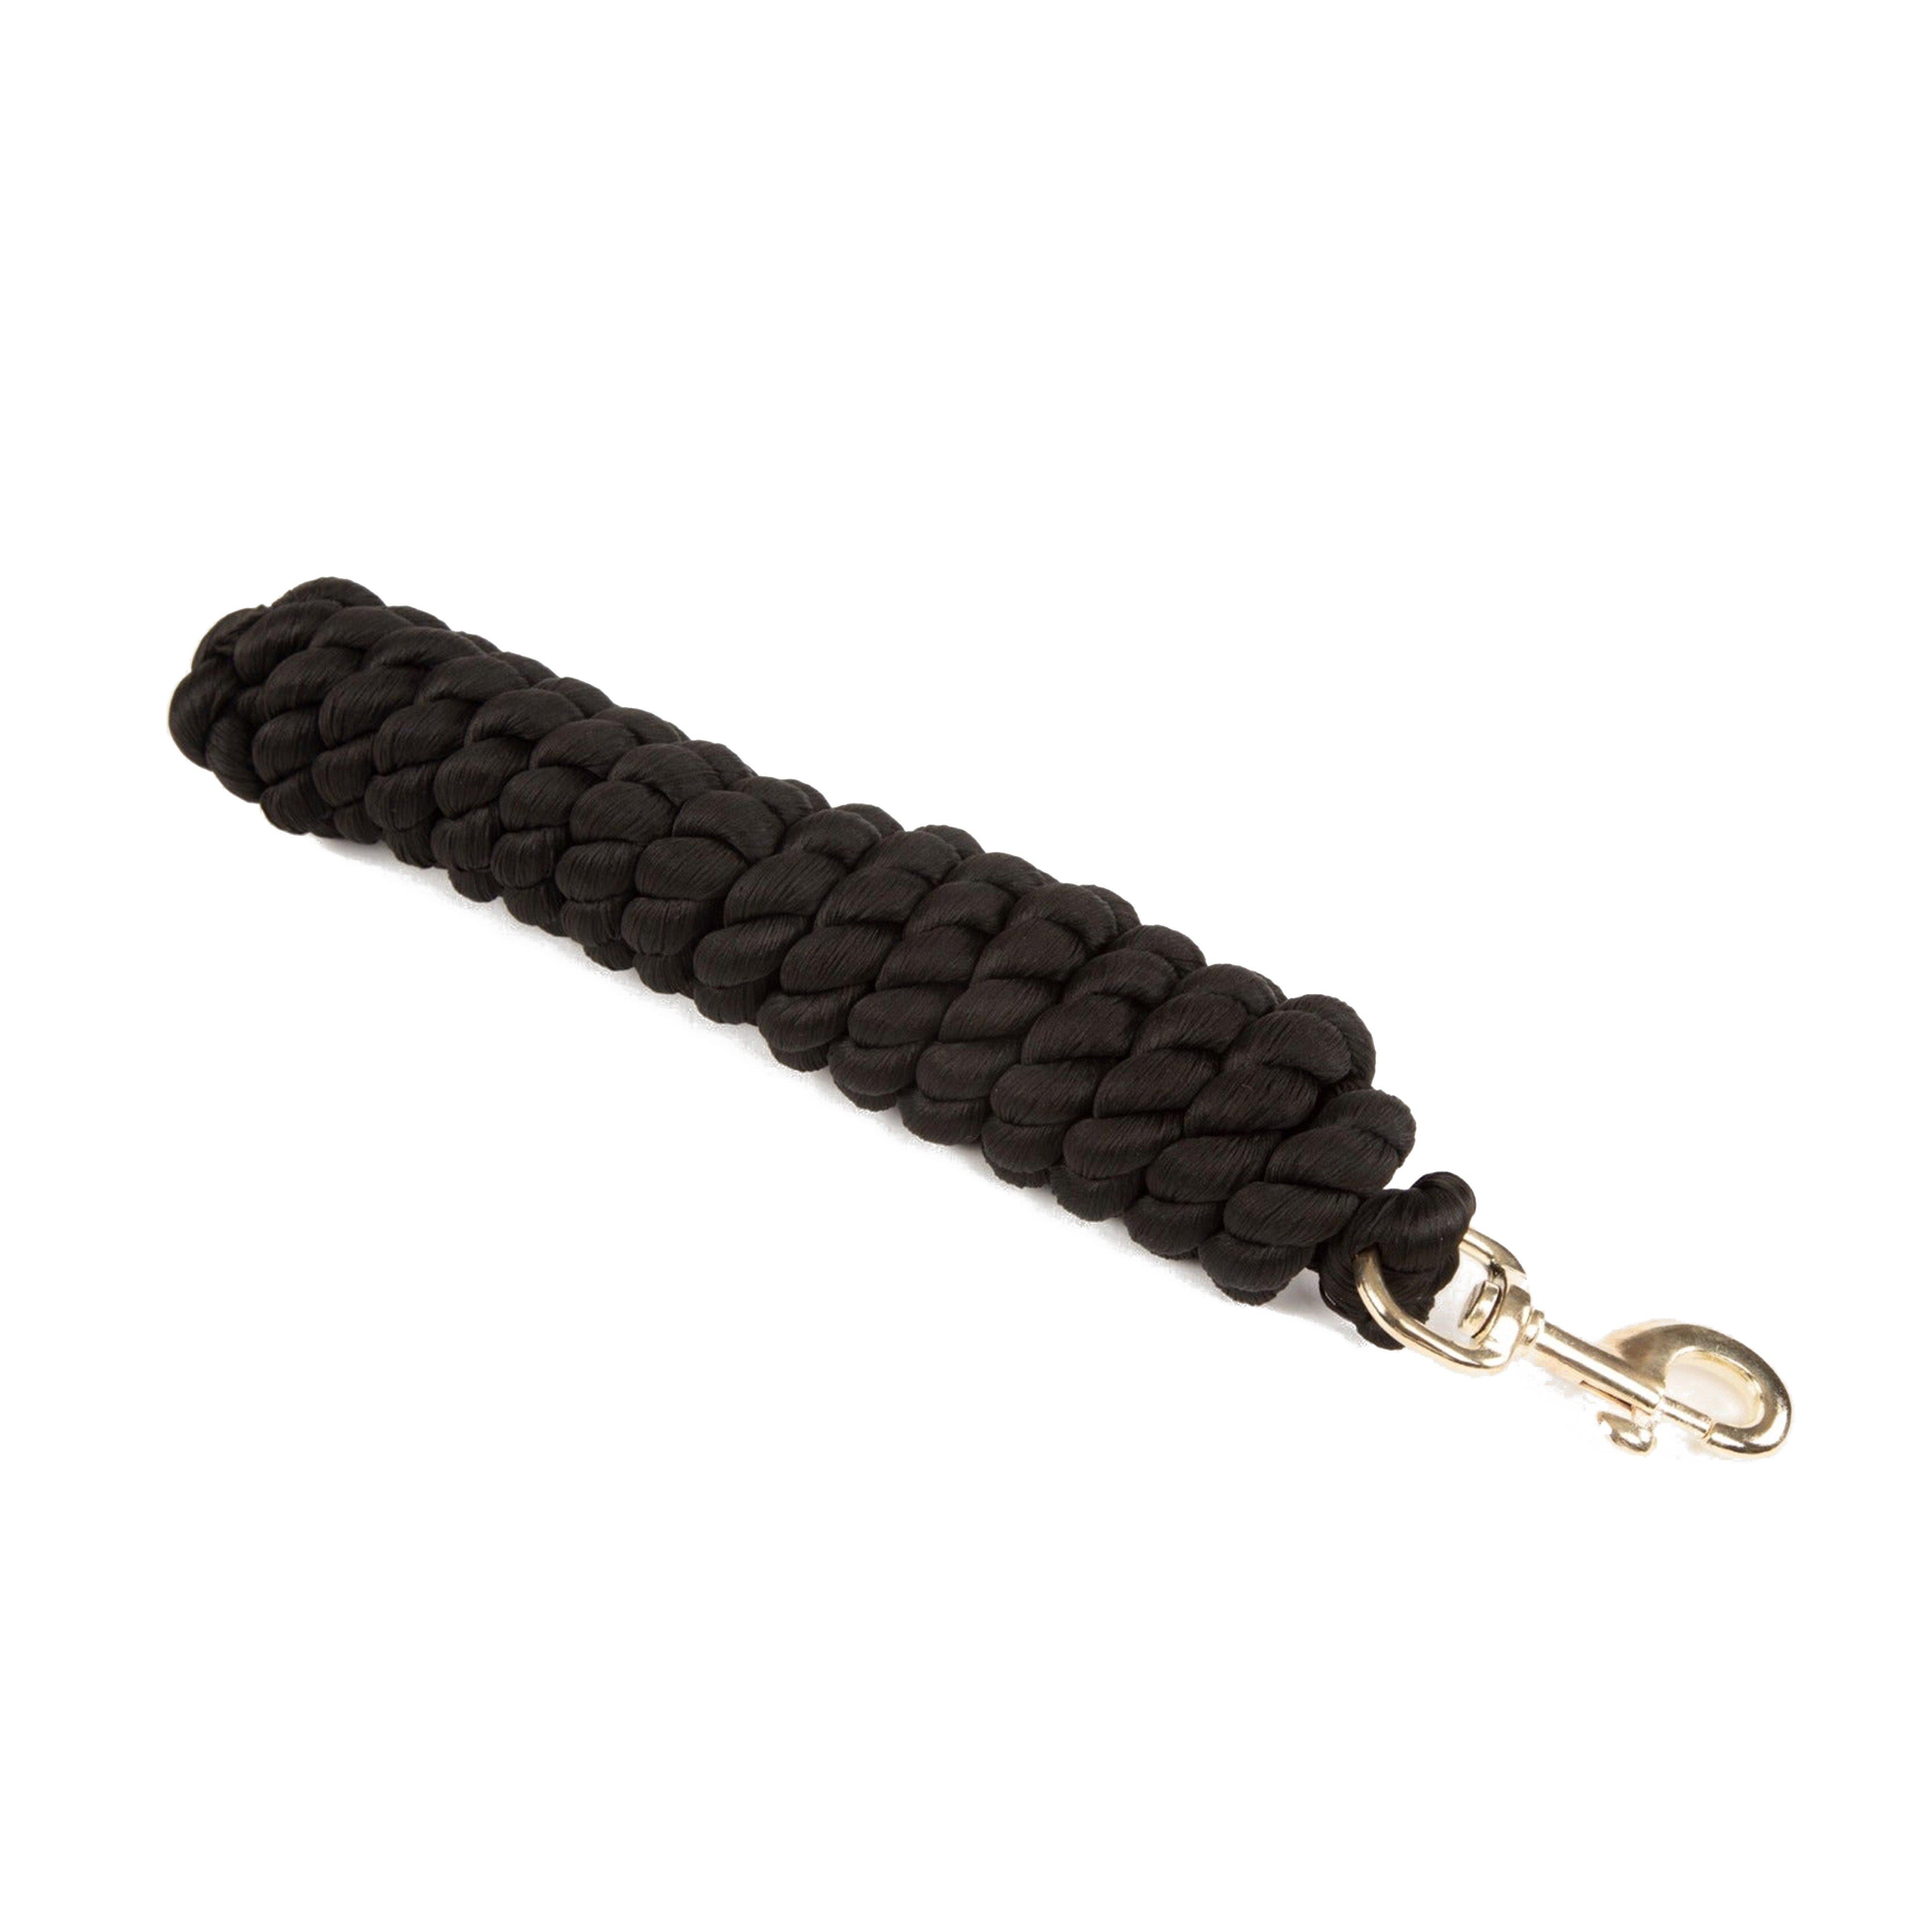 Shires Wessex Leadrope Black